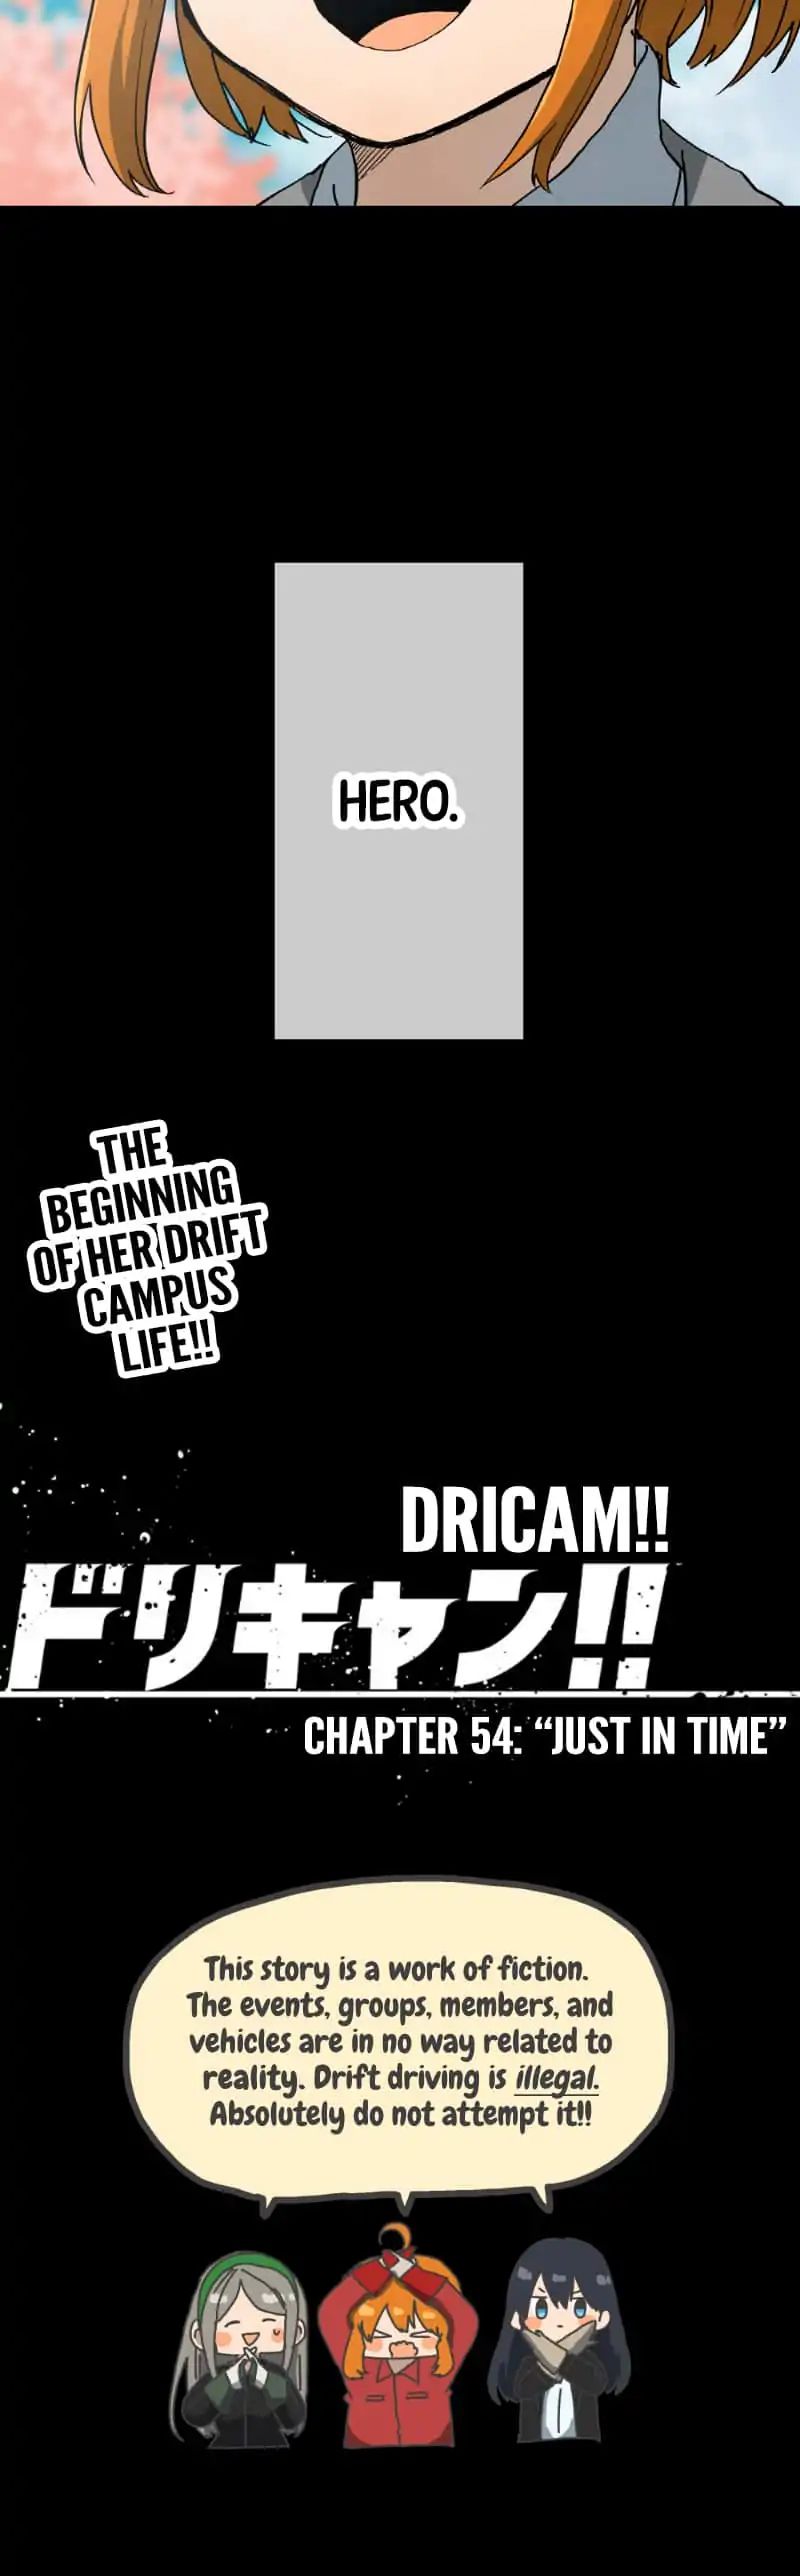 Dricam!! Chapter 54: Just In Time